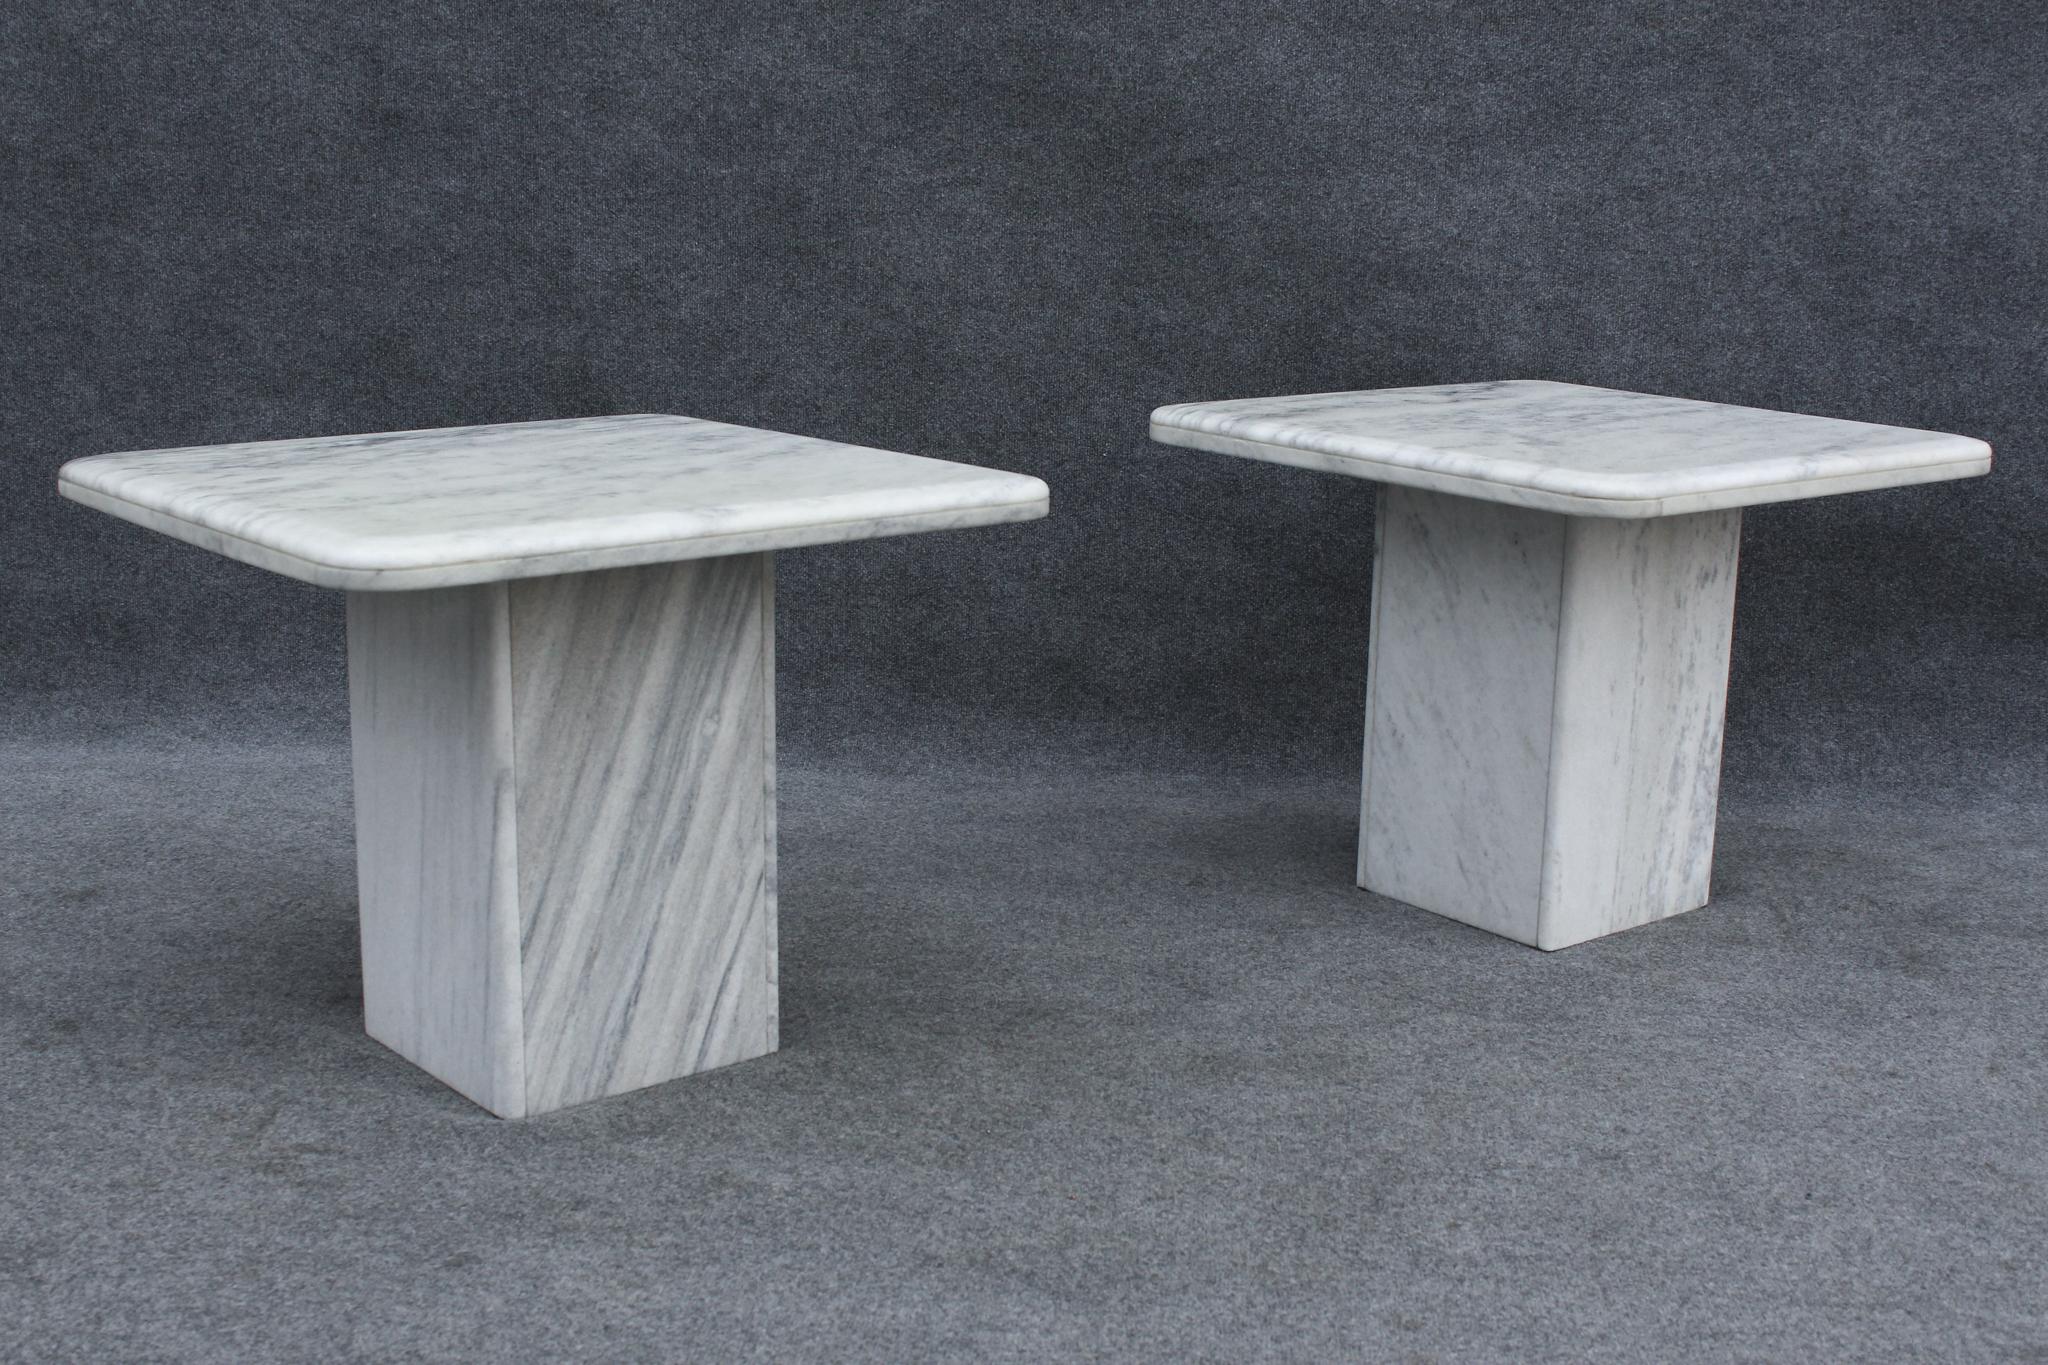 Pair of Italian Side Tables in White Marble With Grey Veining 1970s For Sale 7